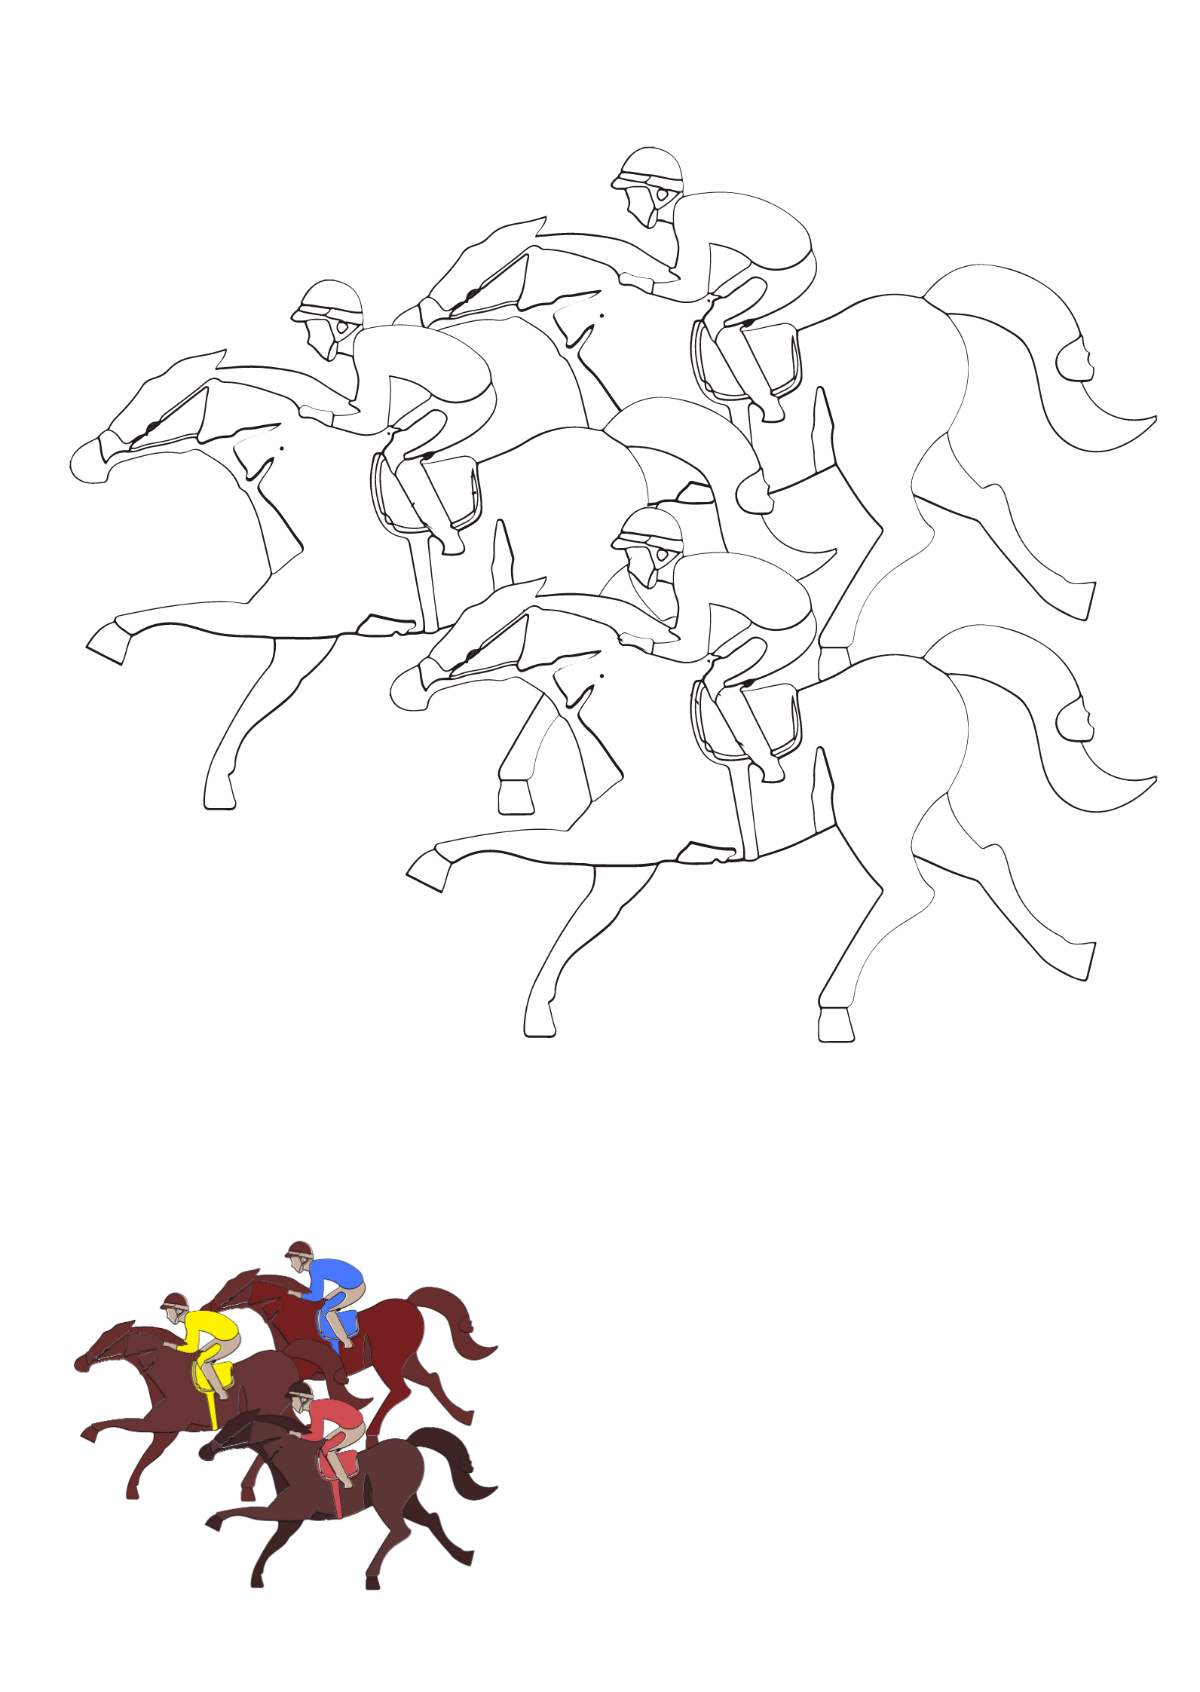 Horse Racing Coloring Page